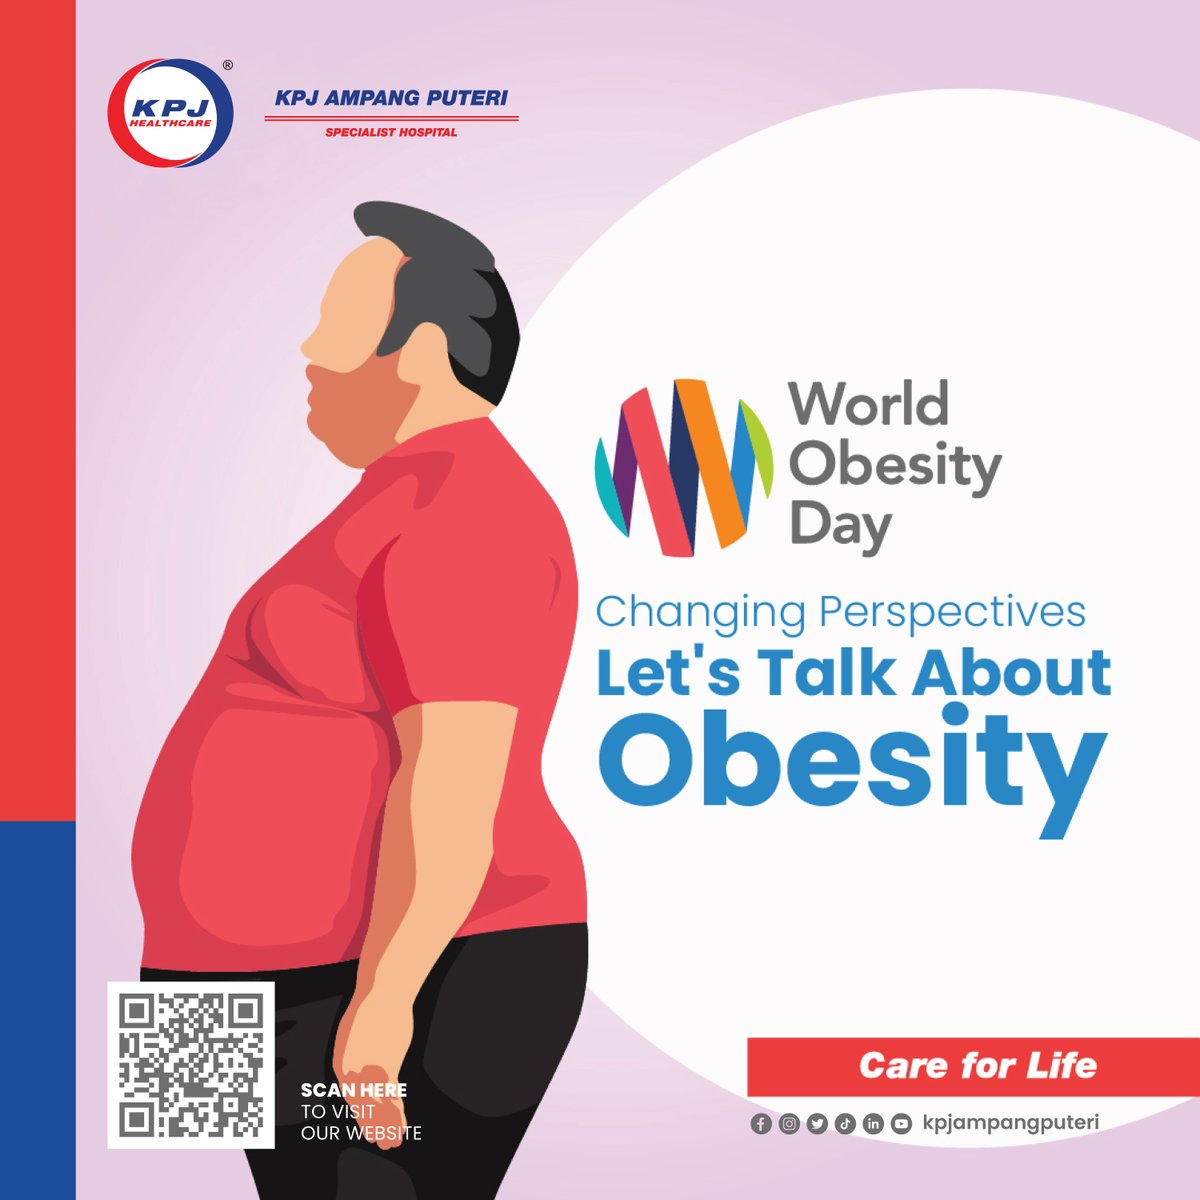 Together we can correct misconceptions surrounding obesity, acknowledge its complexities, and take effective, collective action. Because when we all talk, debate and share, we can shift norms and transform health outcomes for everybody.

#WorldObesityDay #careforlife